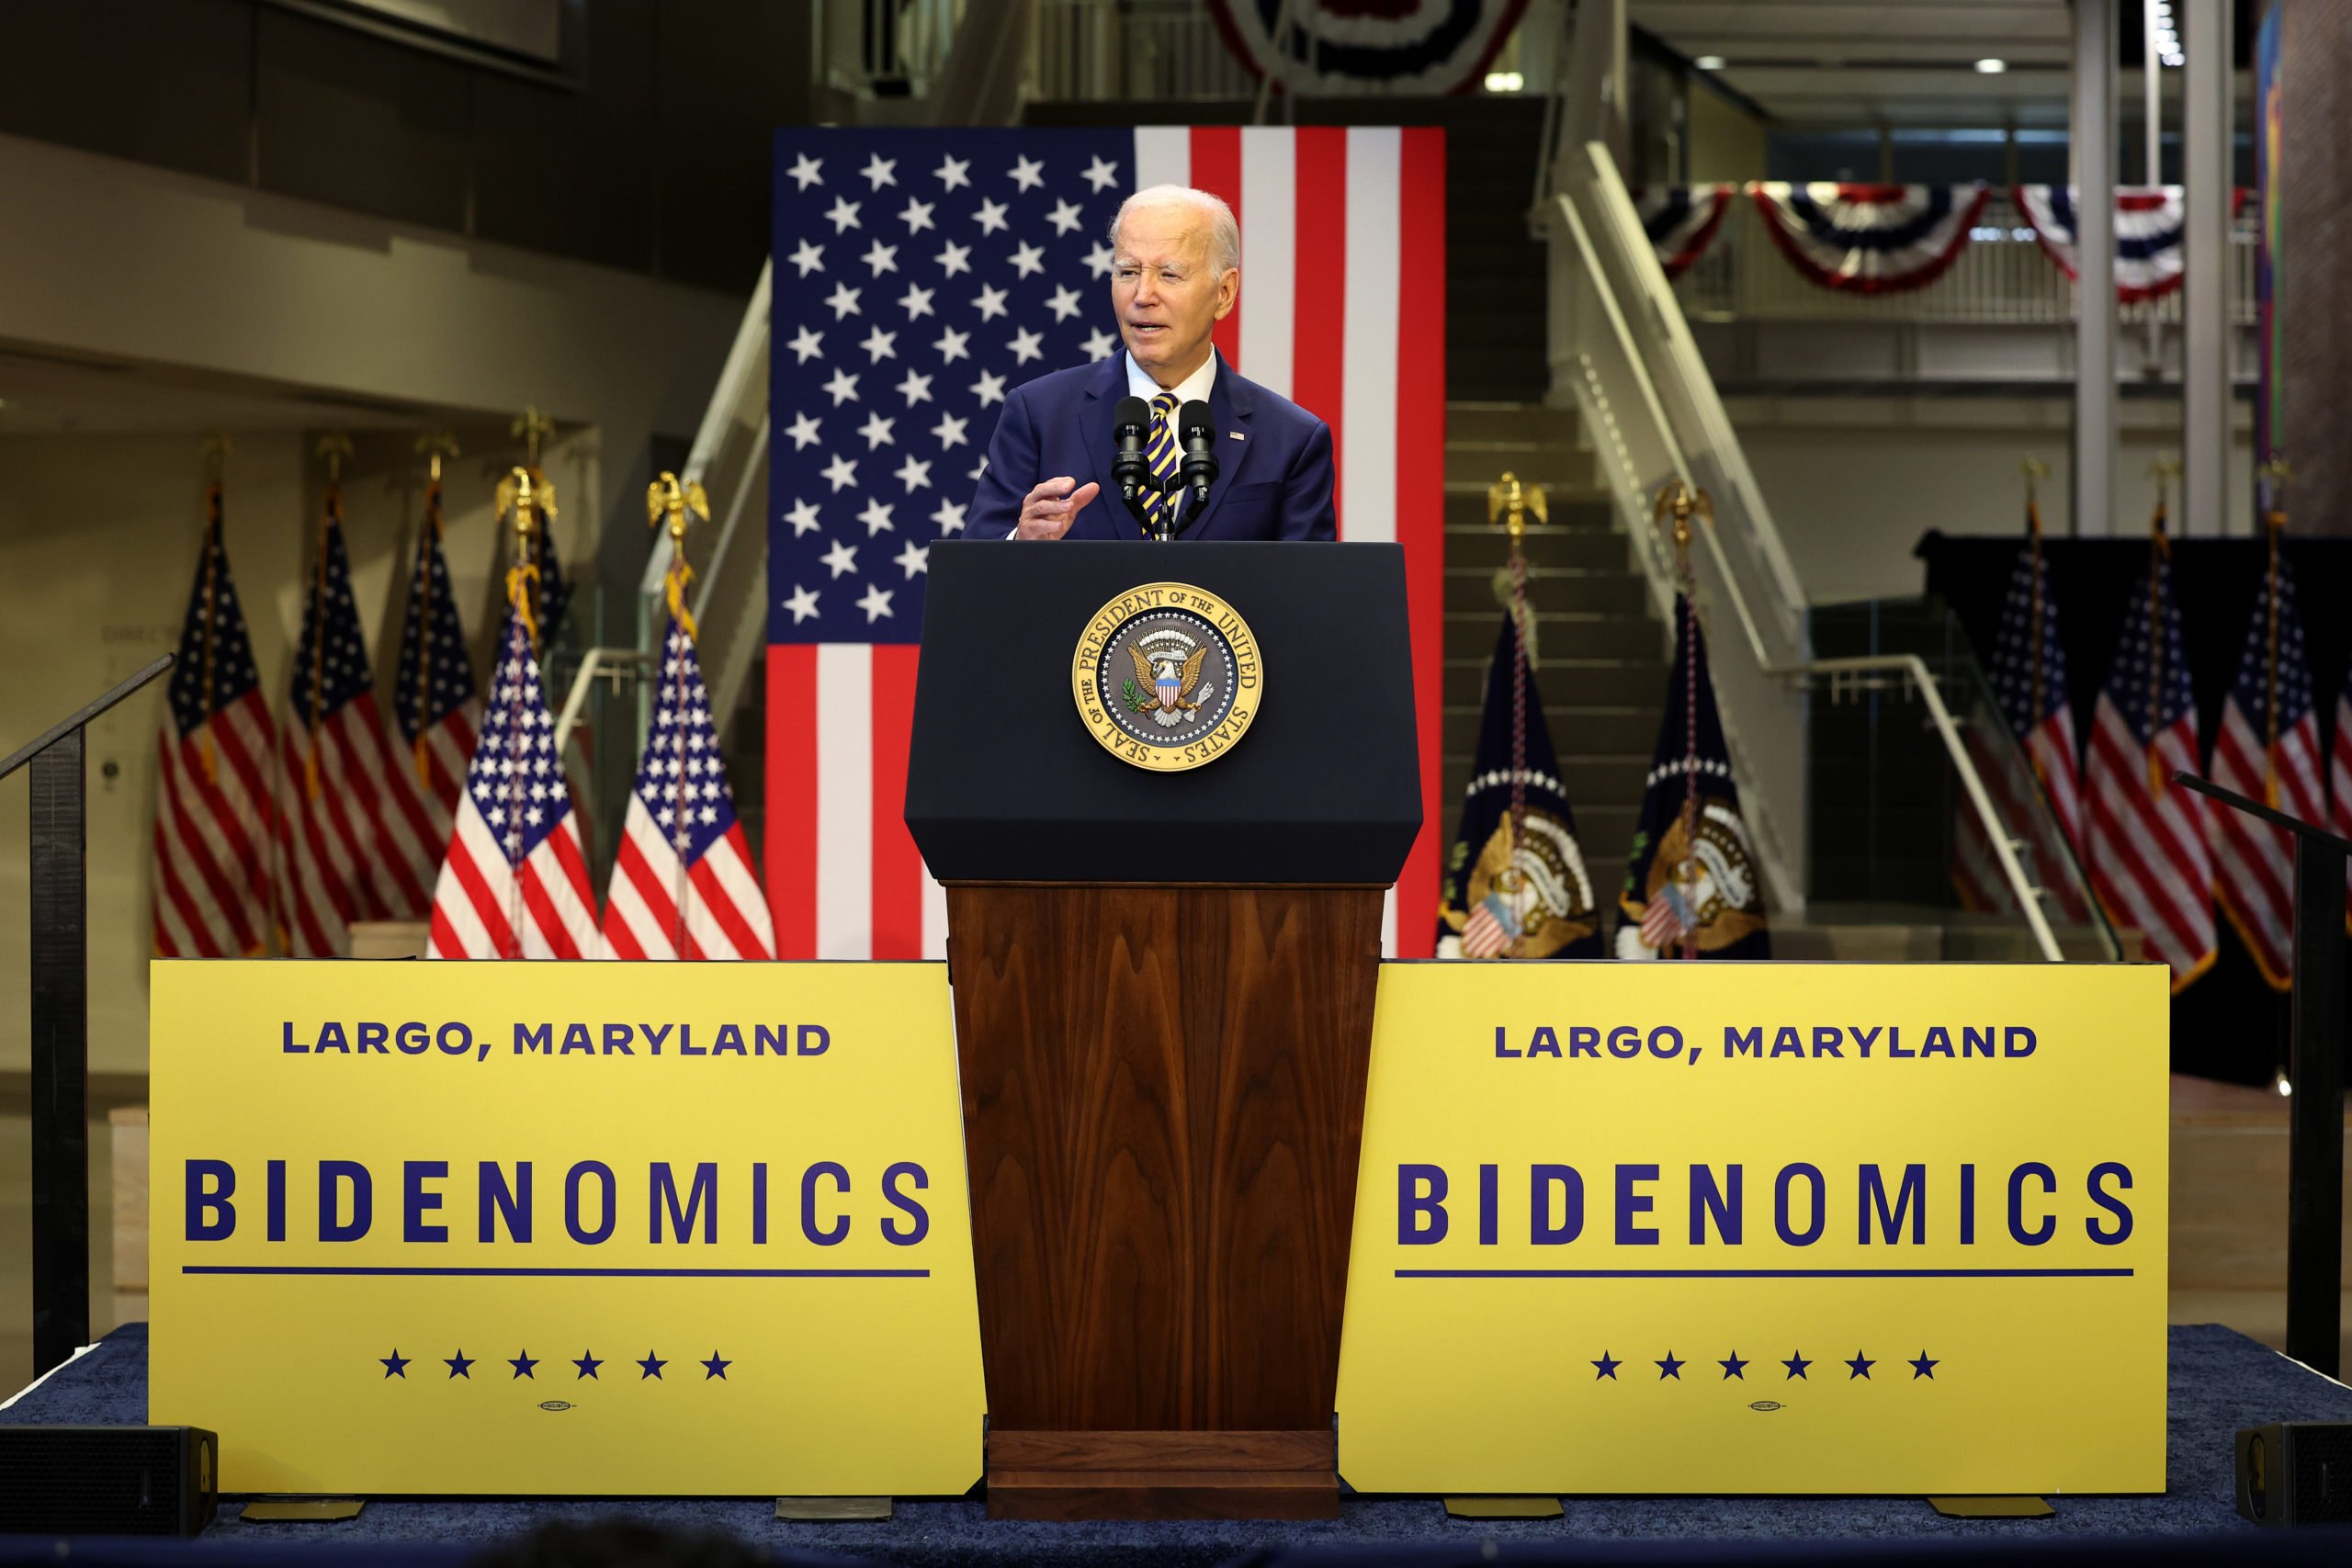 U.S. President Joe Biden delivers remarks at Prince George's Community College on September 14, 2023 in Largo, Maryland. Biden spoke on his economic plan, "Bidenomics," outlining his plan to create jobs, reduce inflation and increase wages while comparing it to the Republican's plan that he says will hurt the middle class and cut the social safety net. (Photo by Kevin Dietsch/Getty Images)